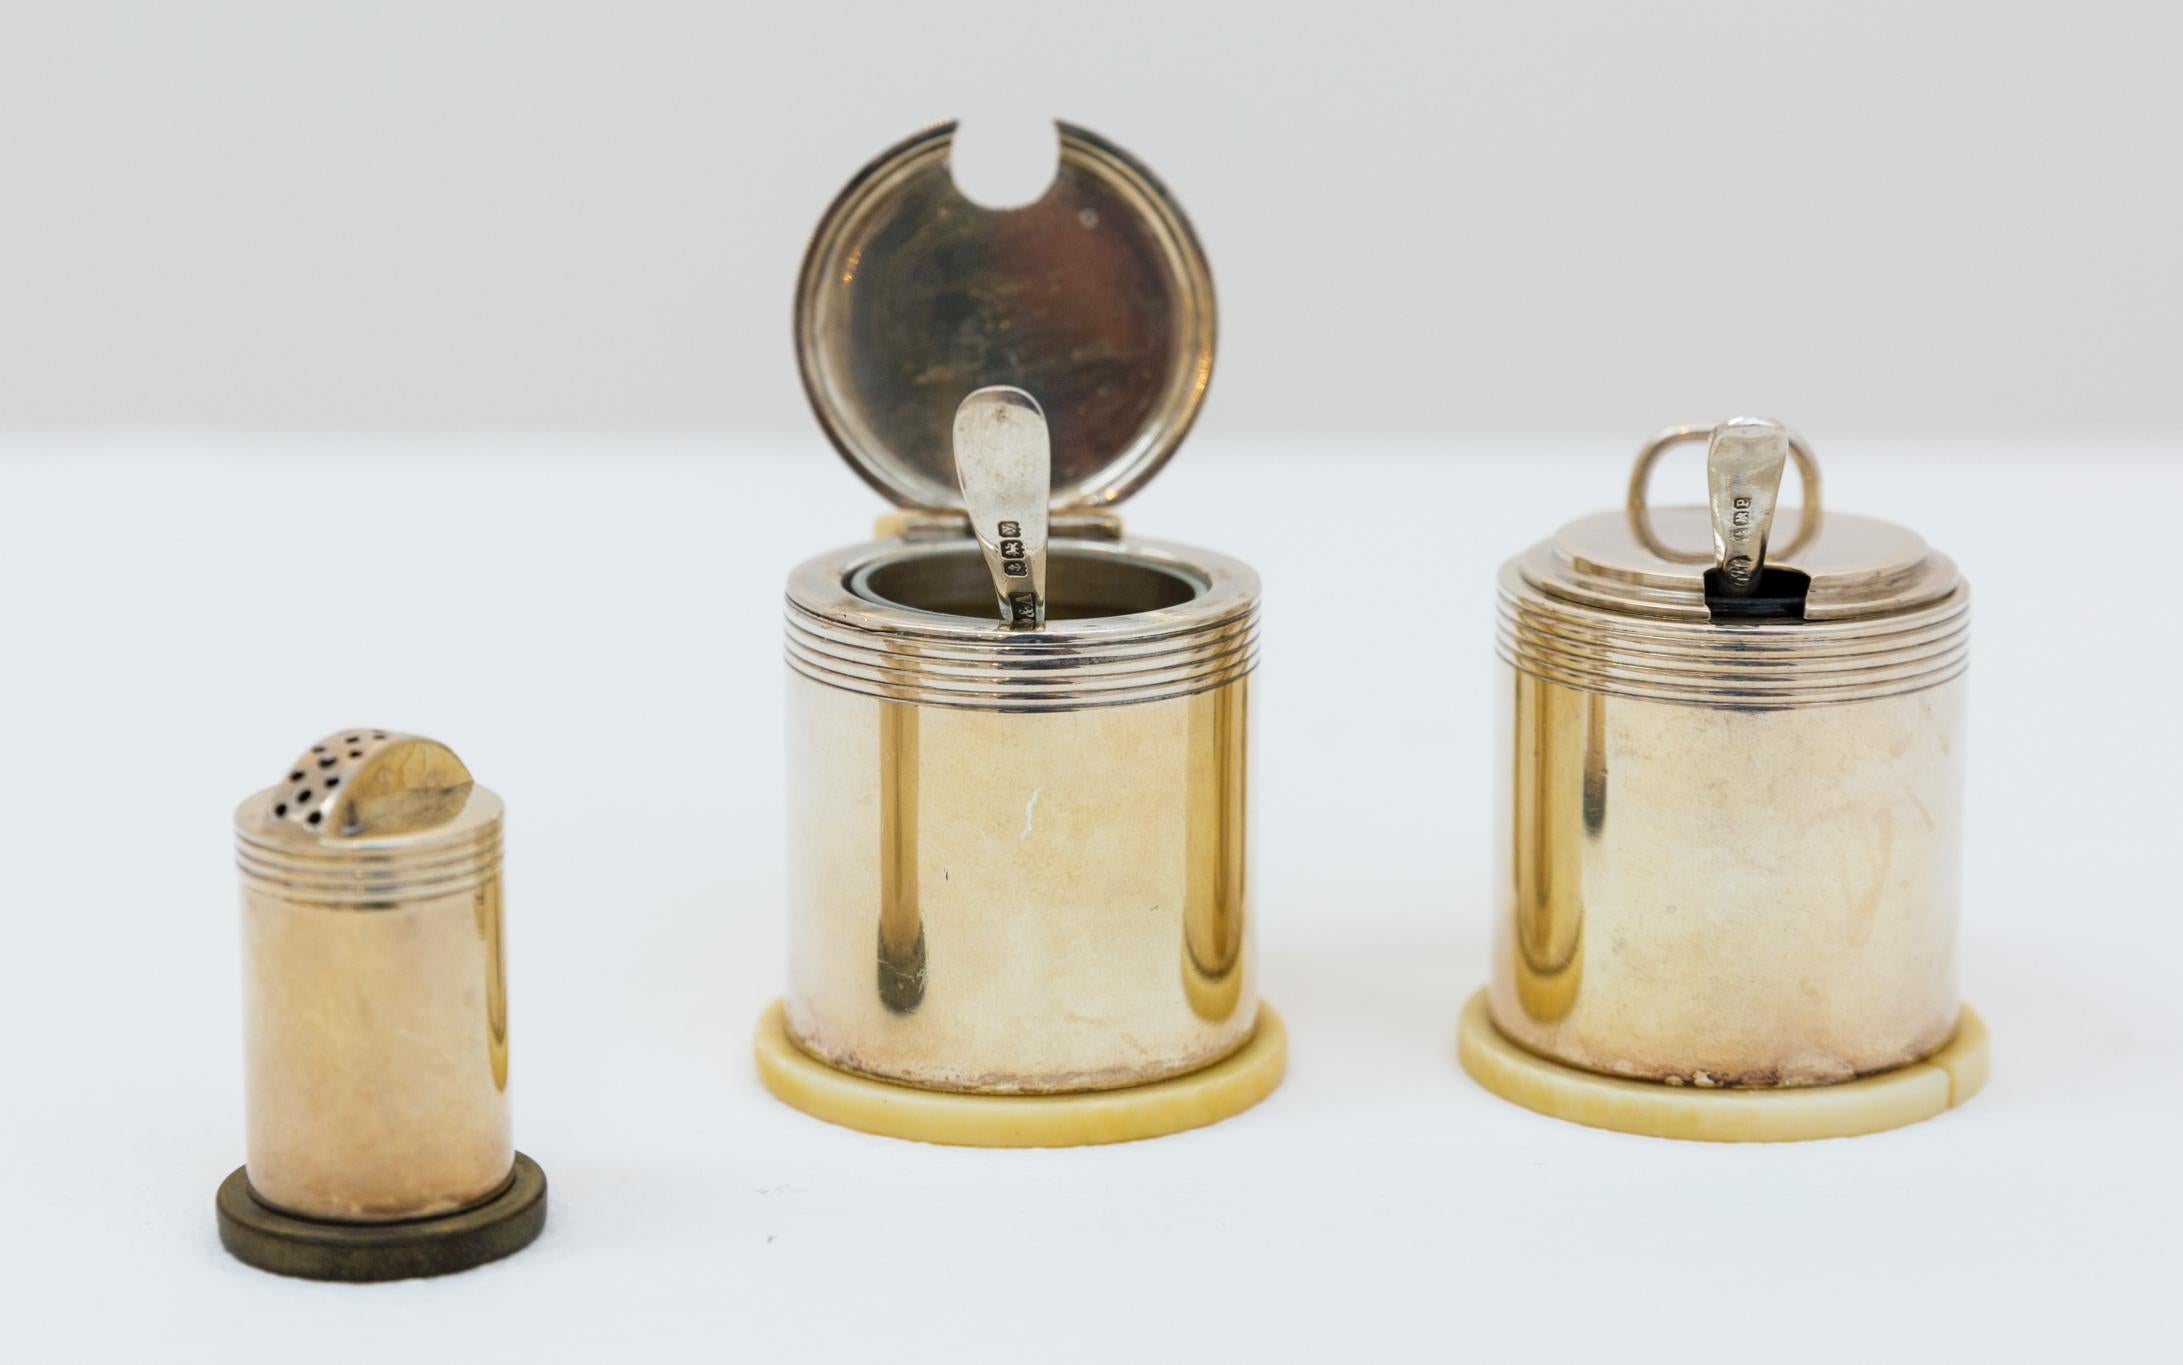 Salt & Pepper set by Jean Puiforcat from 1935, Art Deco, sterling silver with bone ornament. Hallmarked 